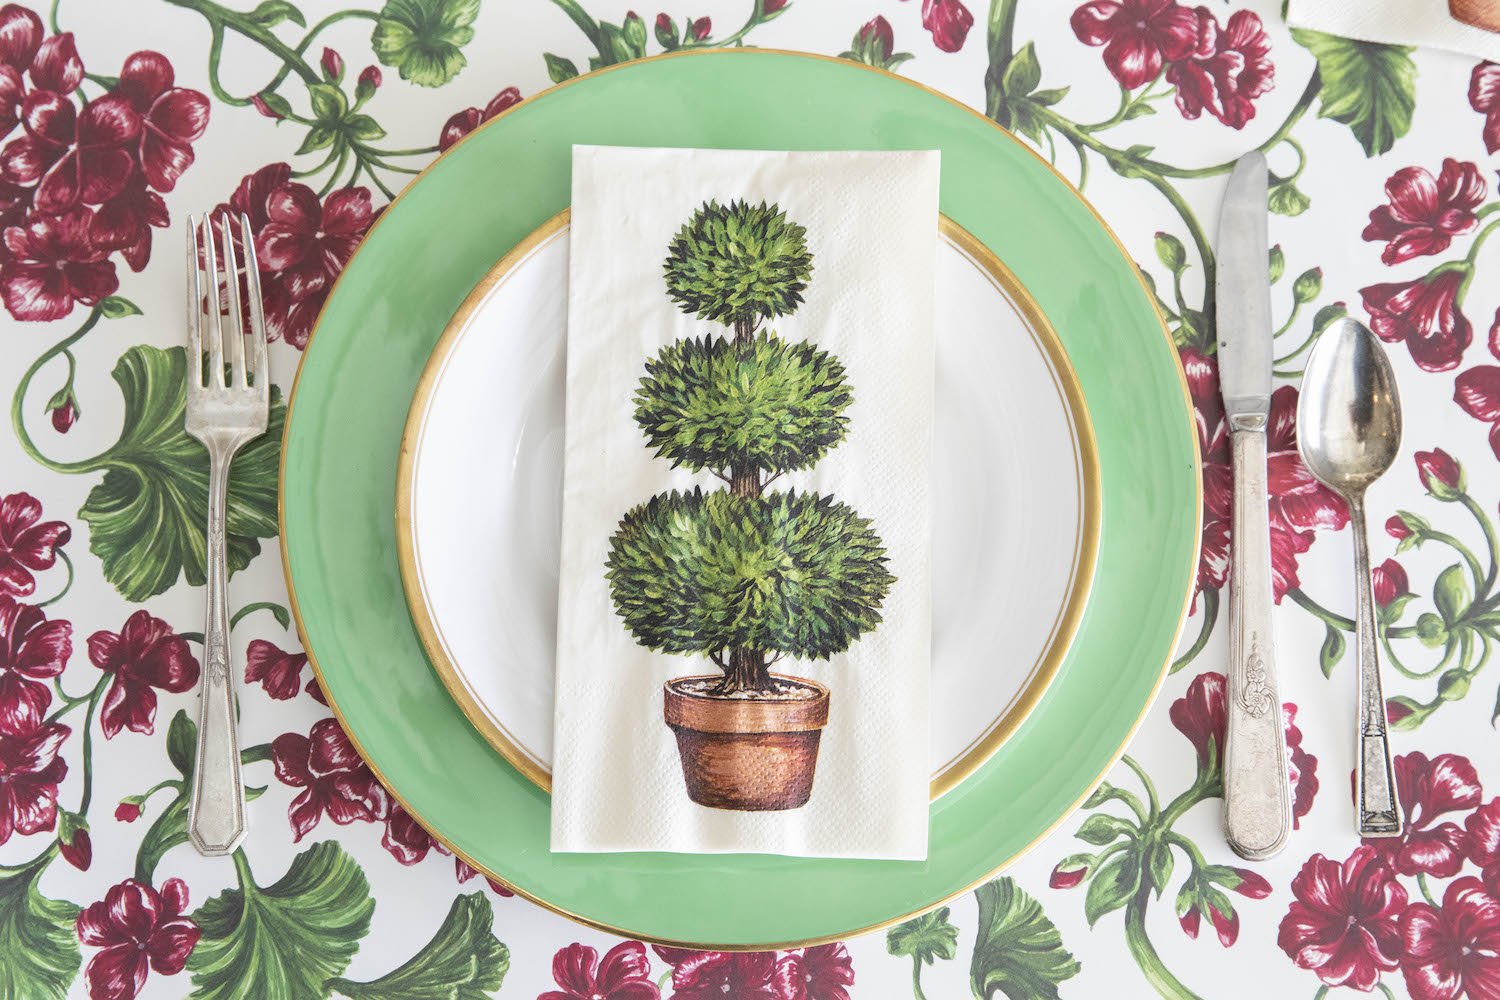 A Topiary Guest Napkin centered on the plate of a garden-themed place setting, from above.